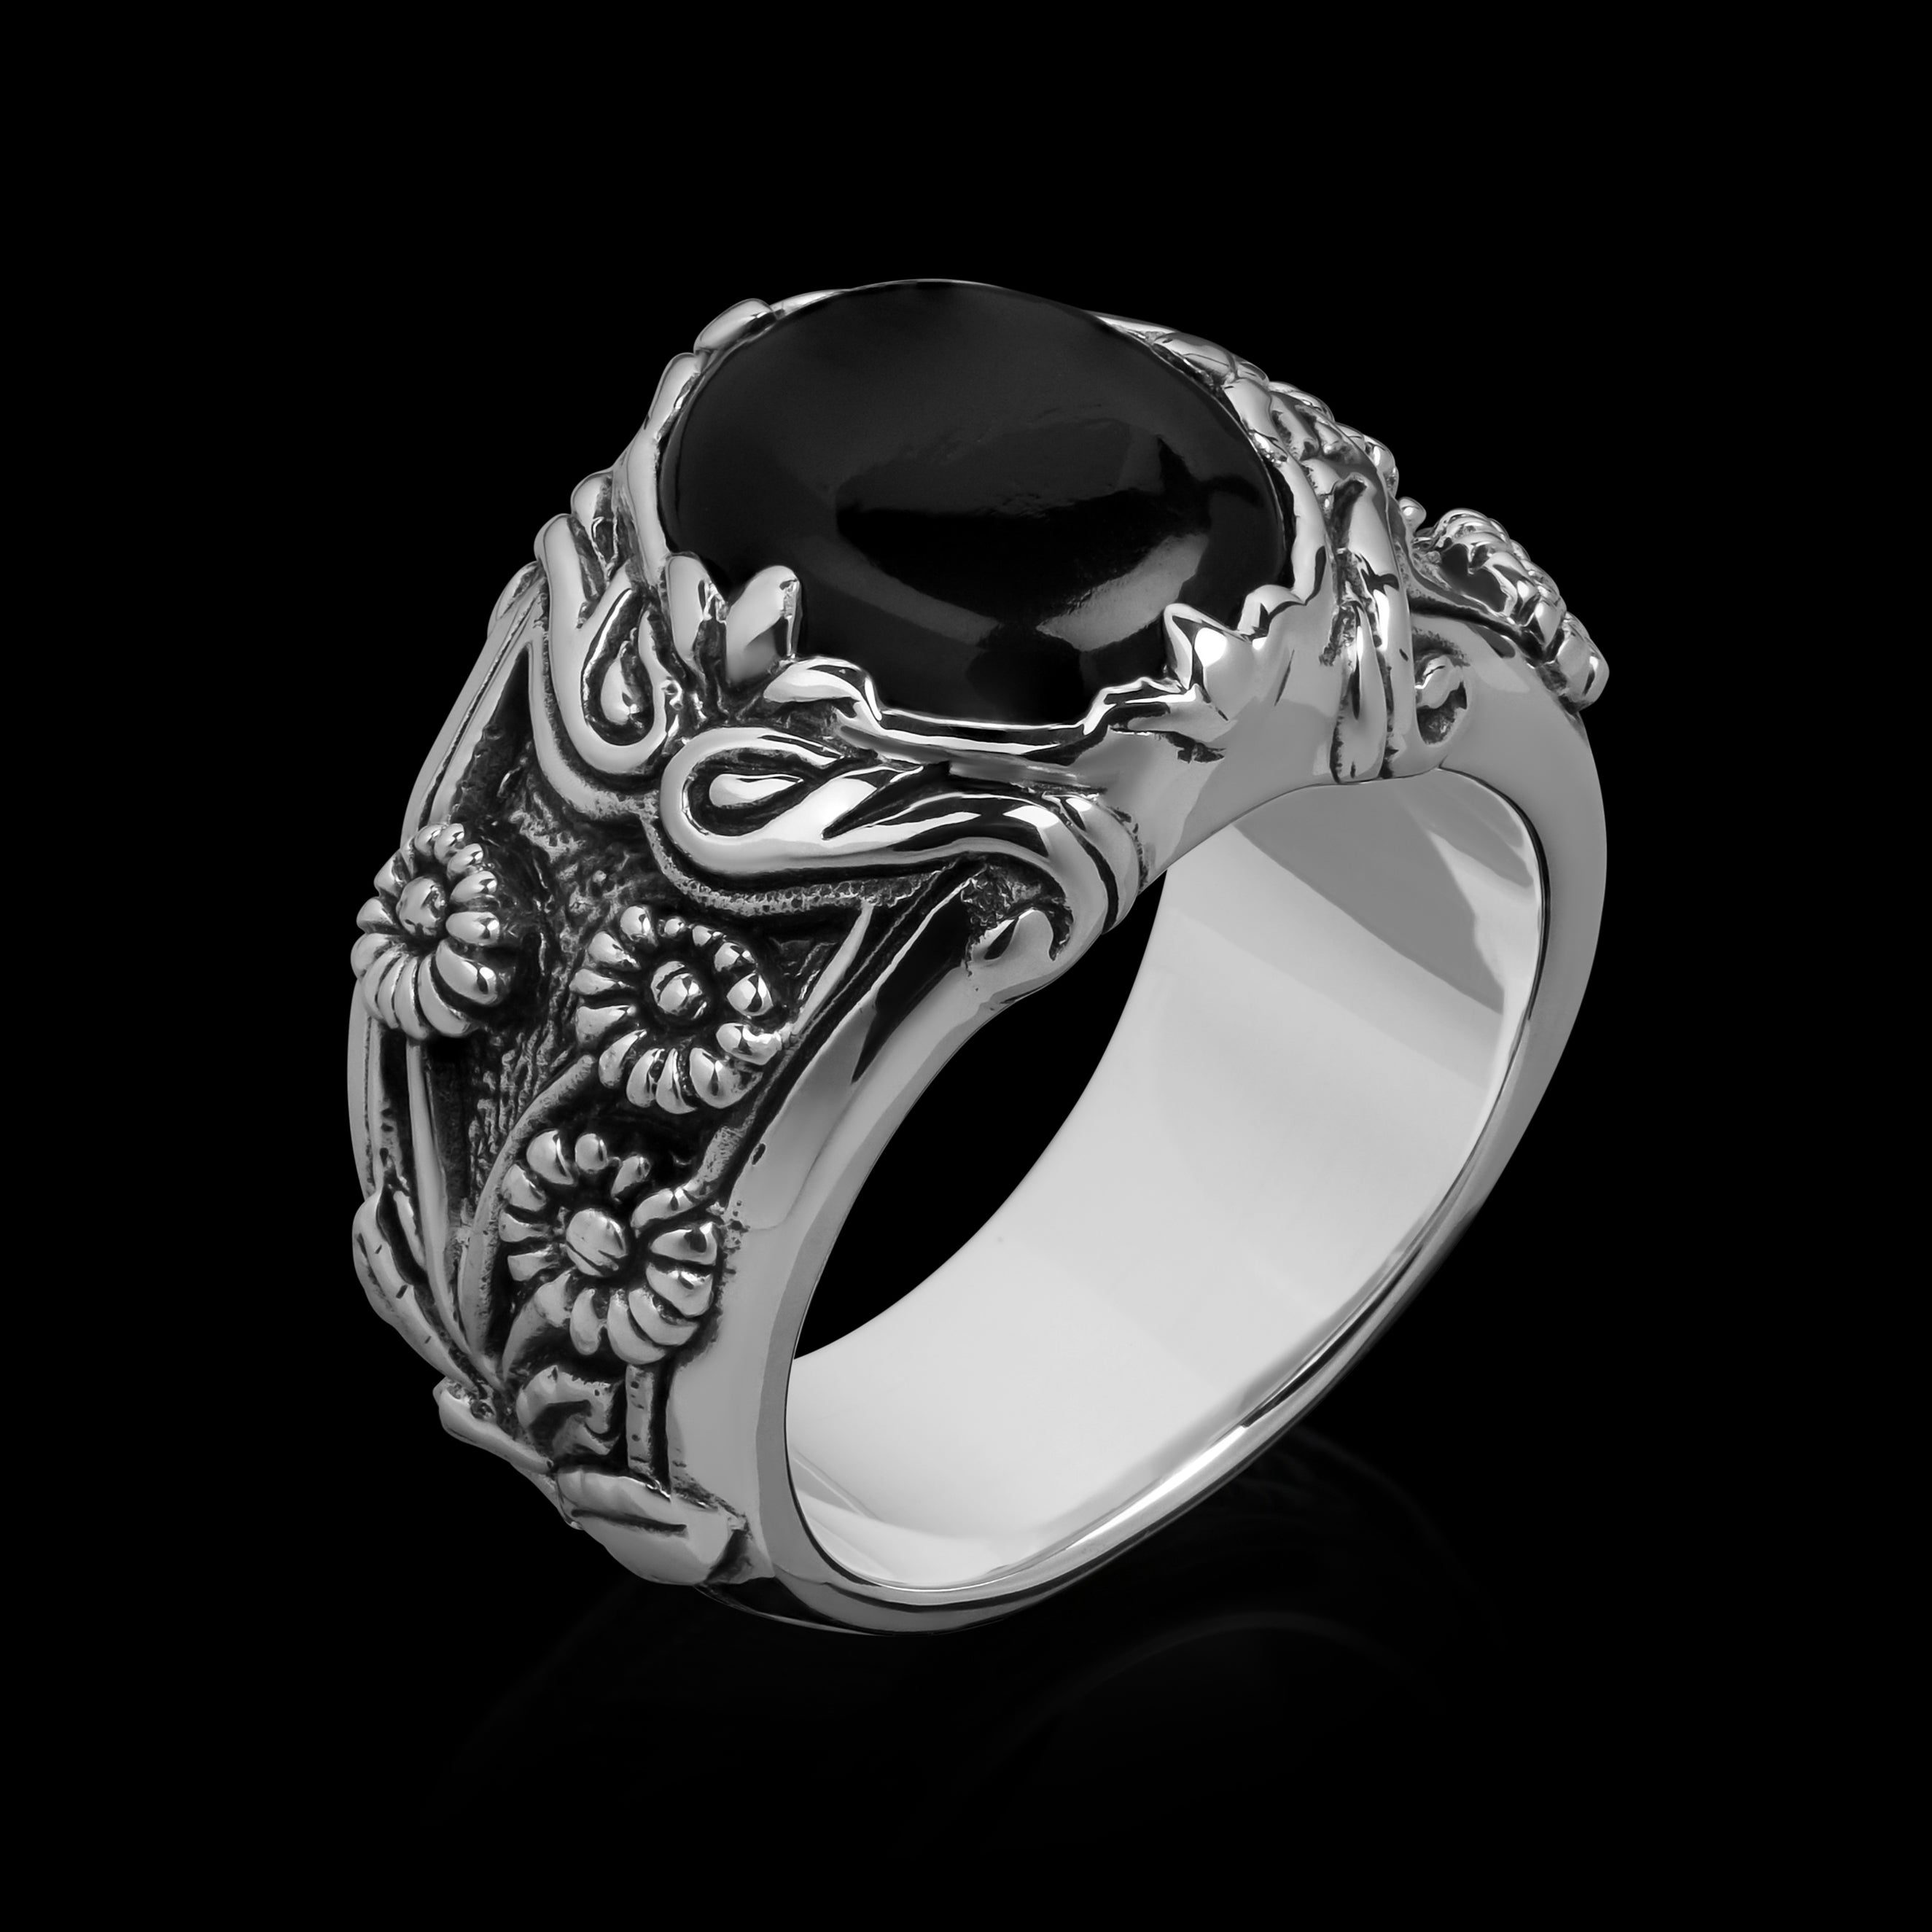 Etah Love   Sterling Silver Jewelry   The In Bloom x Onyx Ring